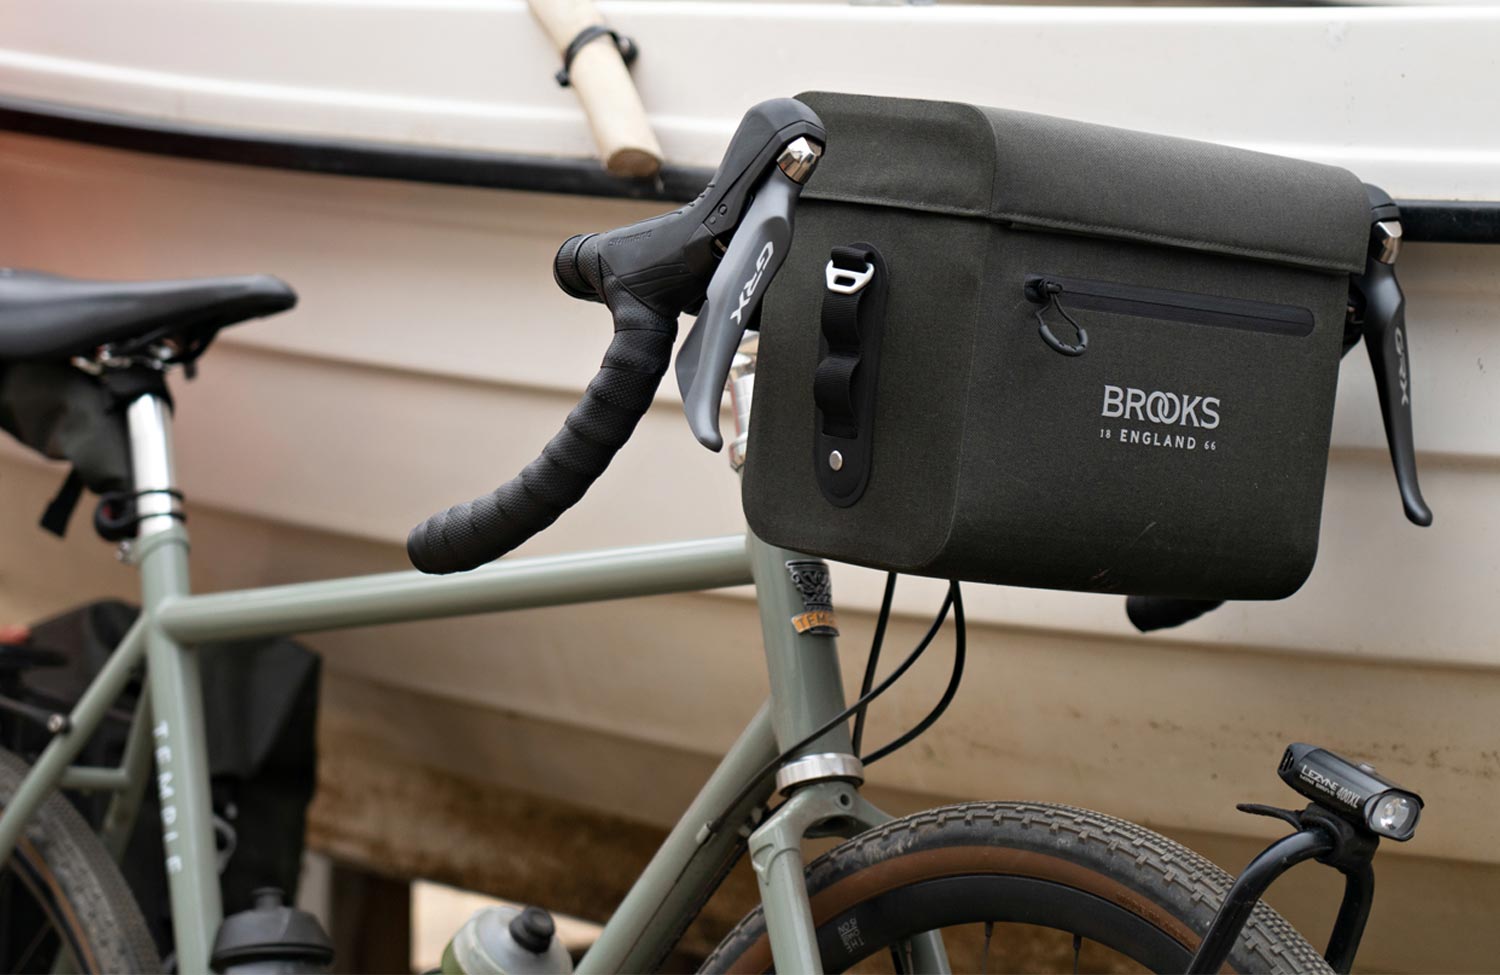 New colors, new bags: Brooks expands the Scape series